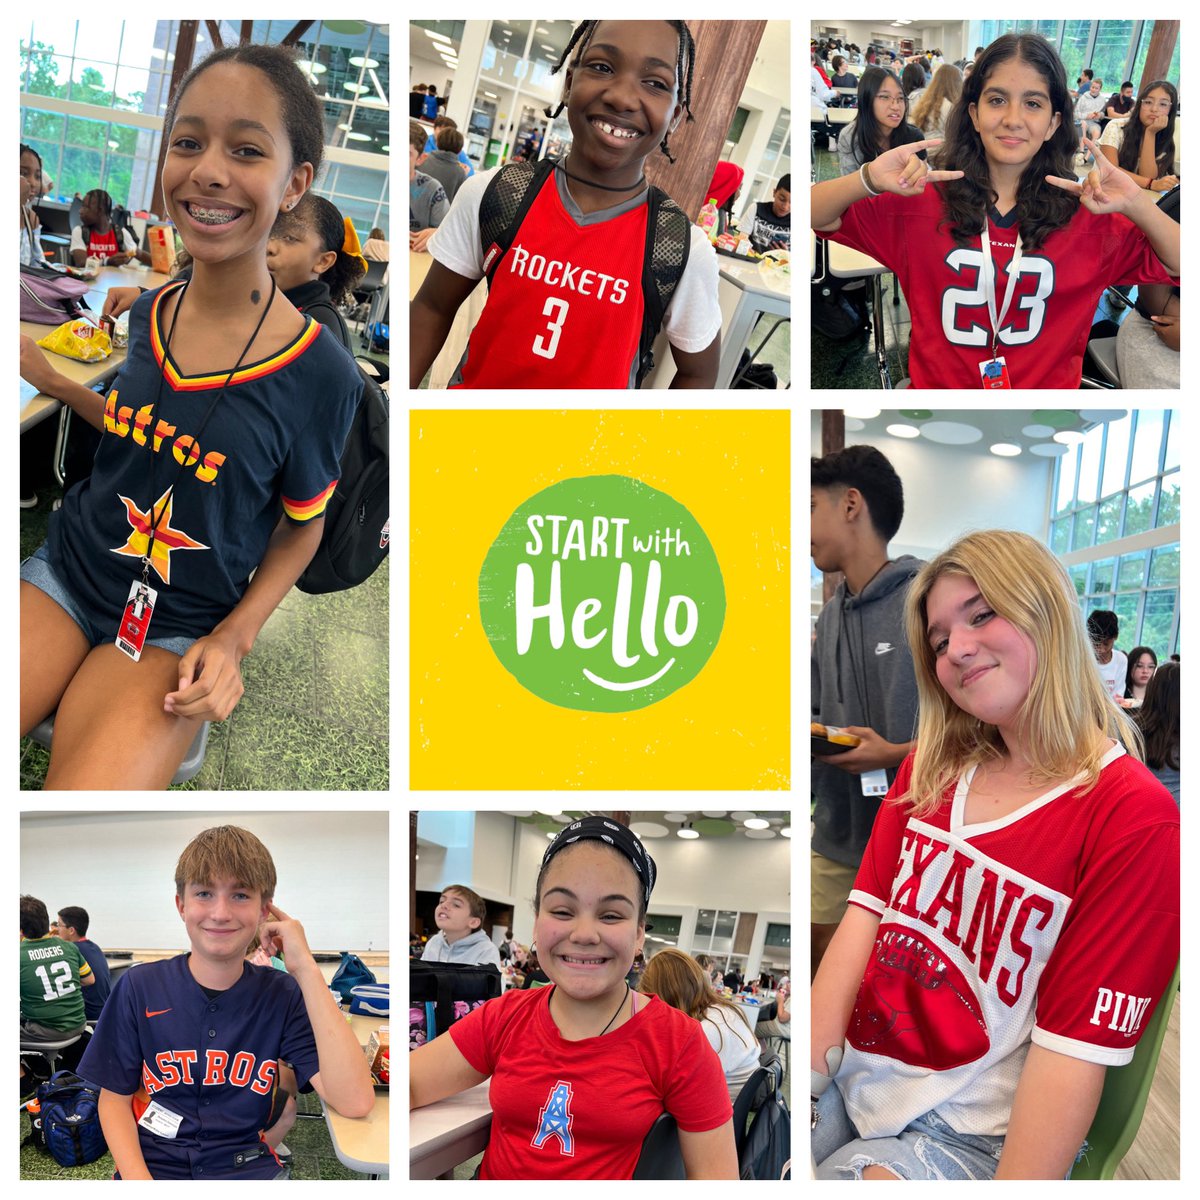 In honor of #StartWithHelloWeek, we “teamed up to say hello” and wore our favorite jerseys! Cougars, wear your KMS spirit gear tomorrow and pledge to be an Upstander! #KMSCougarPride🐾